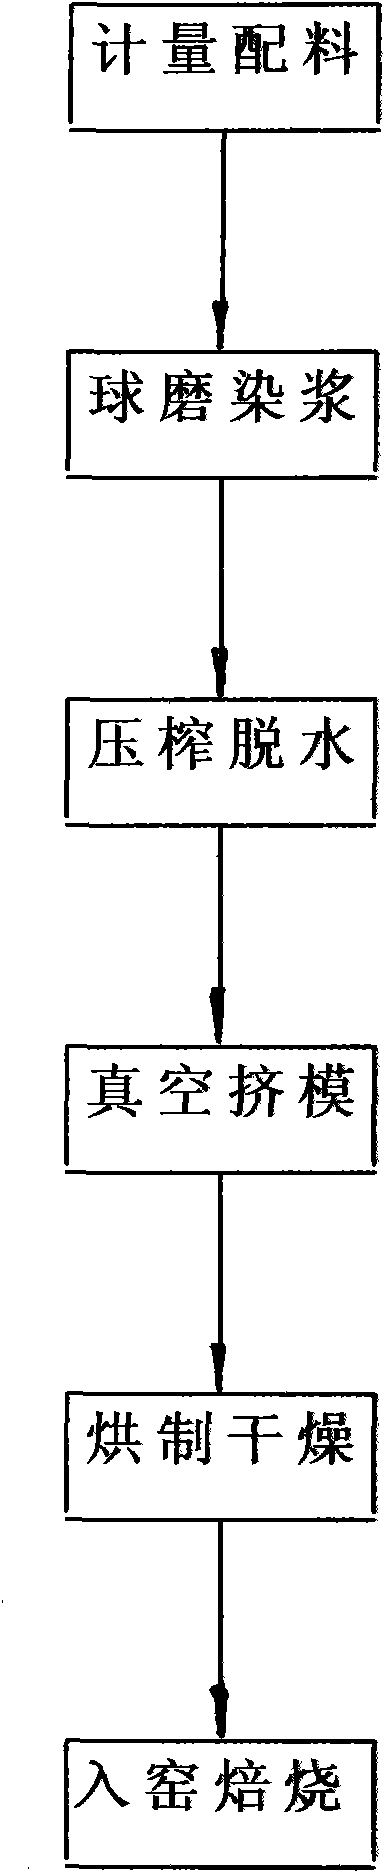 Blank formulation for generating tile decorative building materials by carbon black coloring and manufacturing method